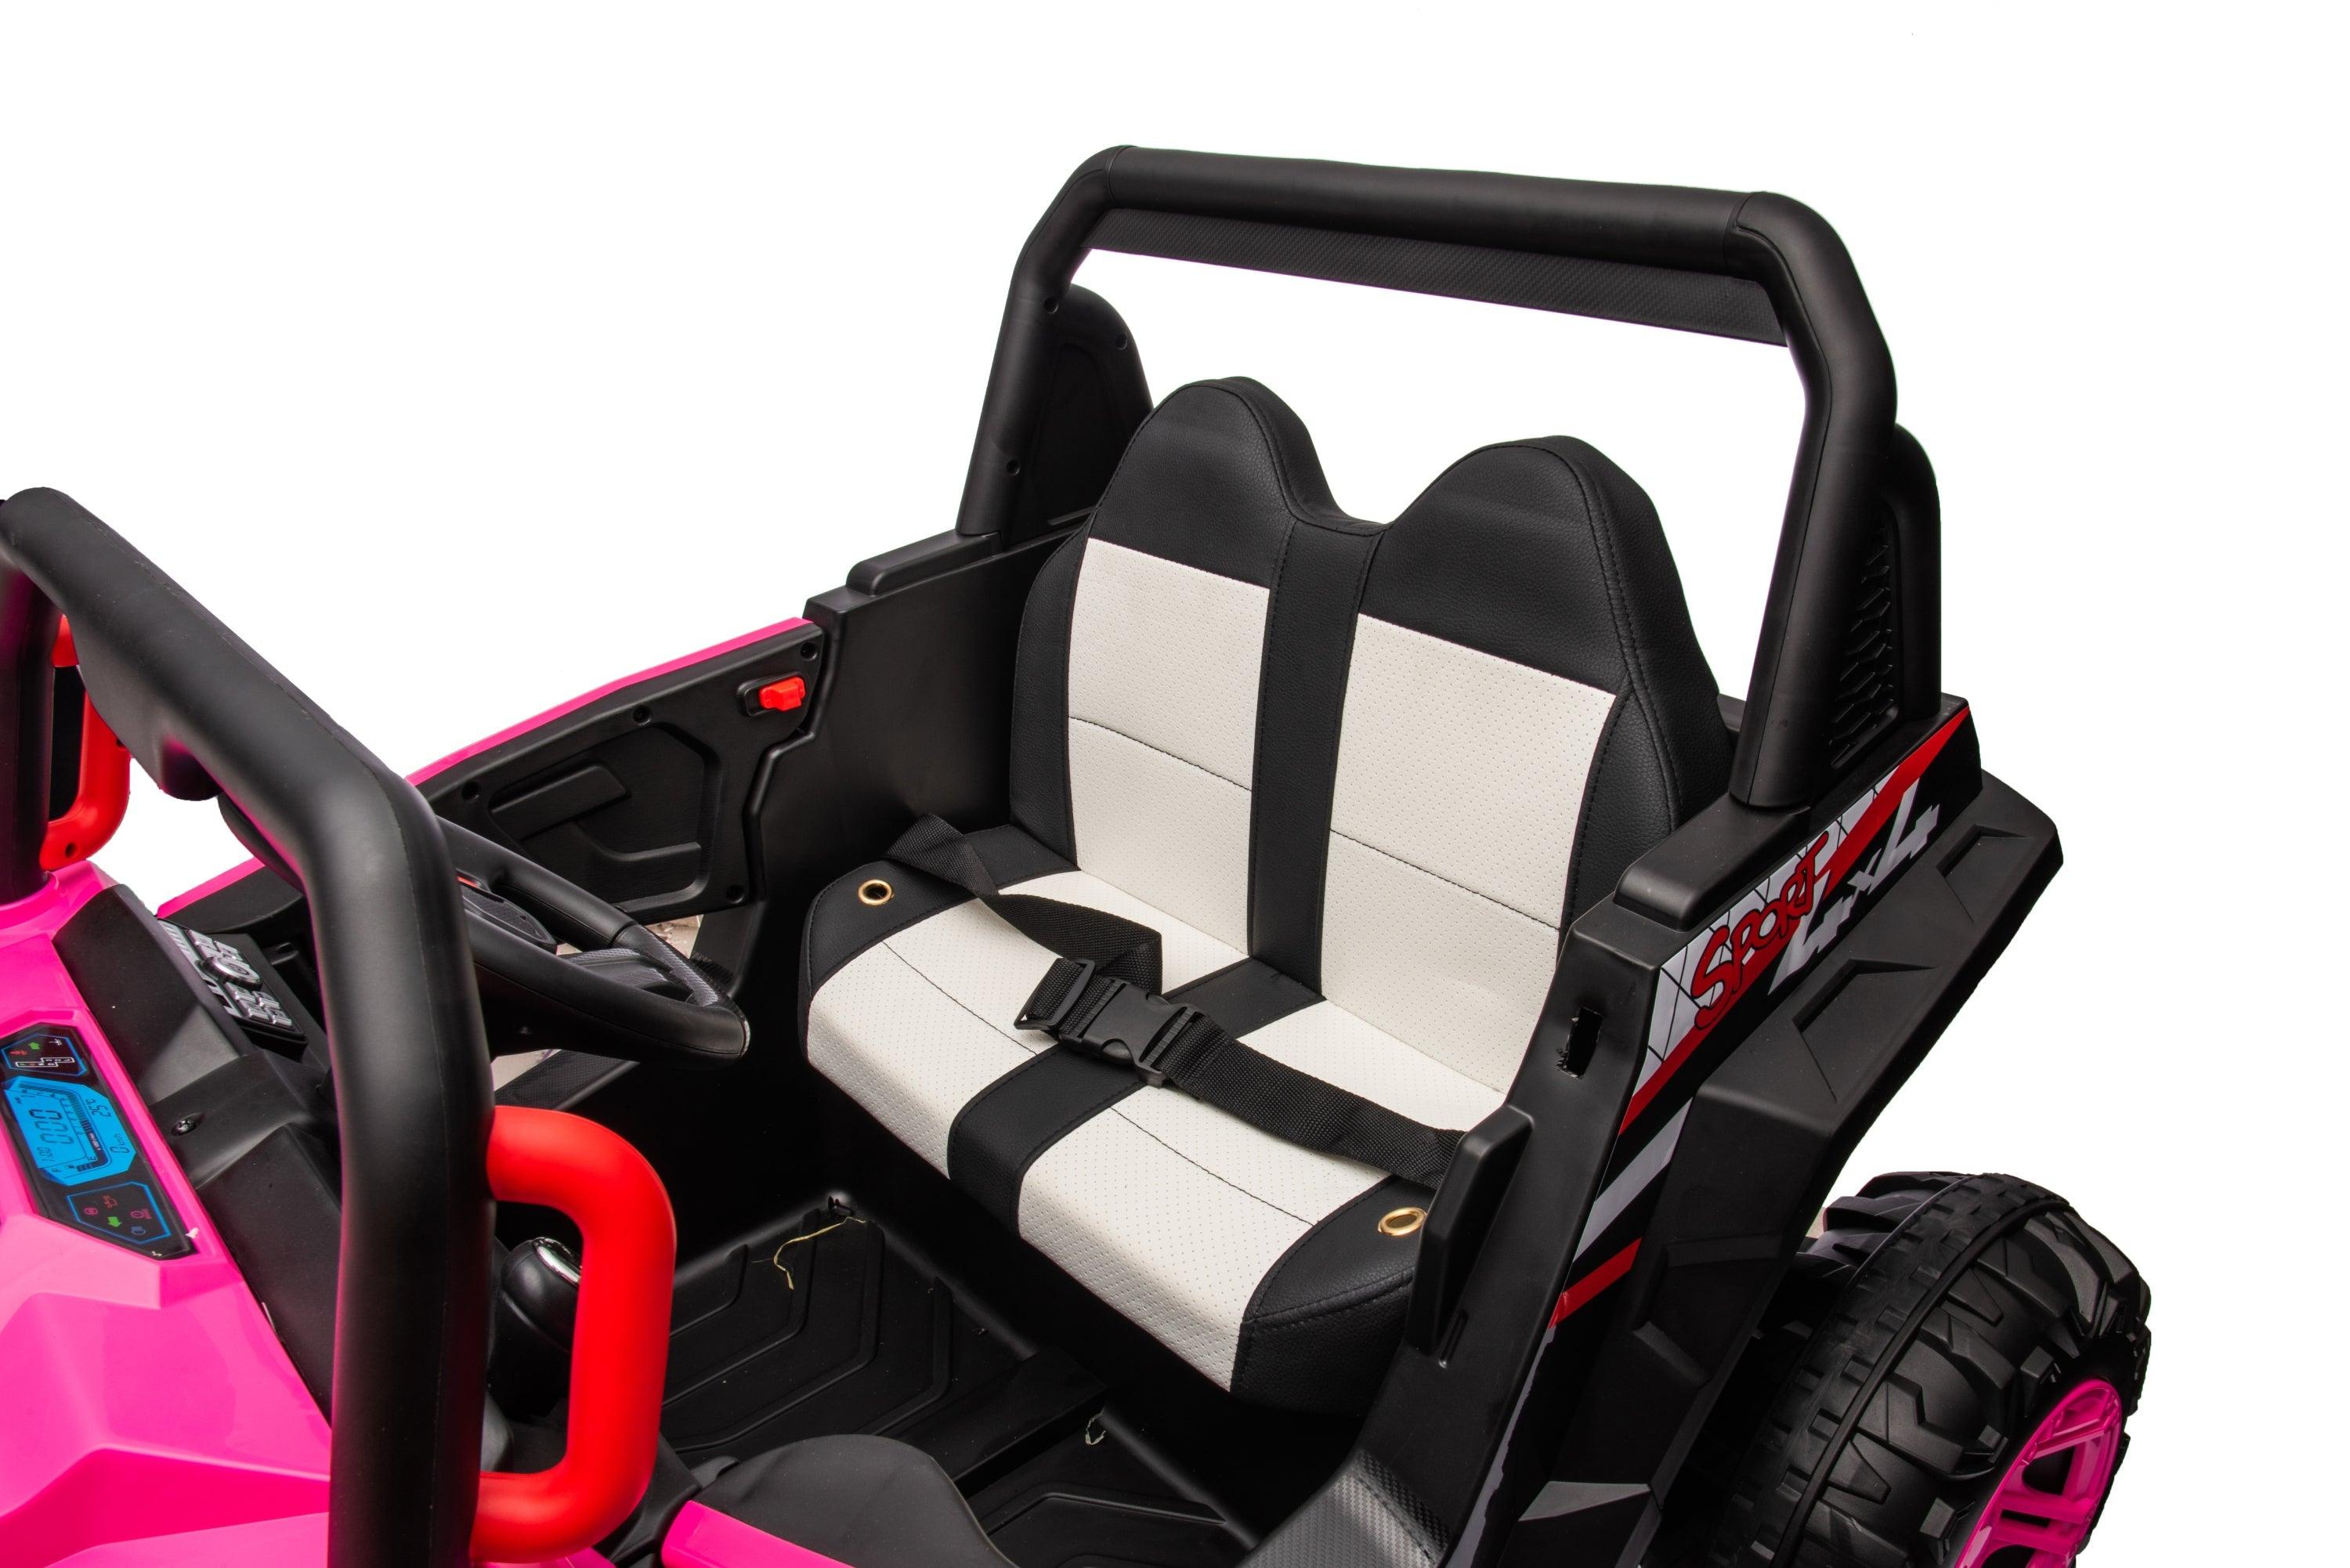 12v7a*1 30w*4 Four-wheel drive leather seat one button start, Forward and backward, high and low speed,  music, front light, power display,  two doors can open, 2.4G R/C, seat belt four wheel absorber LamCham